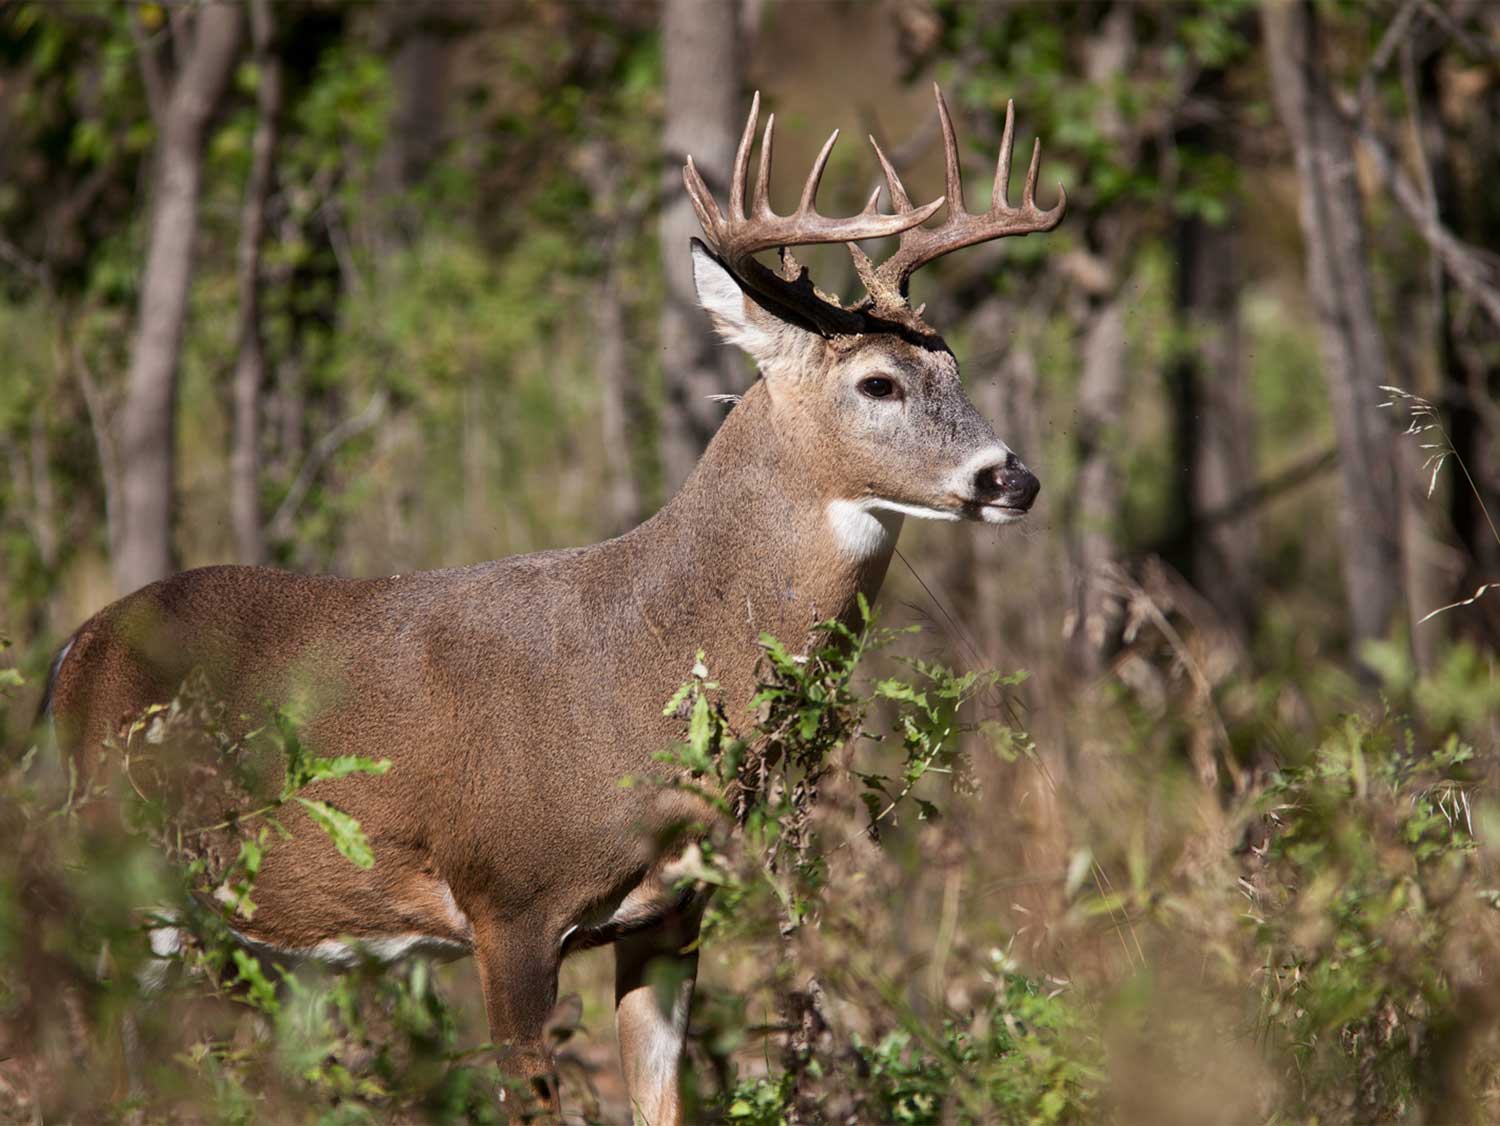 Can You Ride a Deer?: Myth-Busting the Wild Ride!